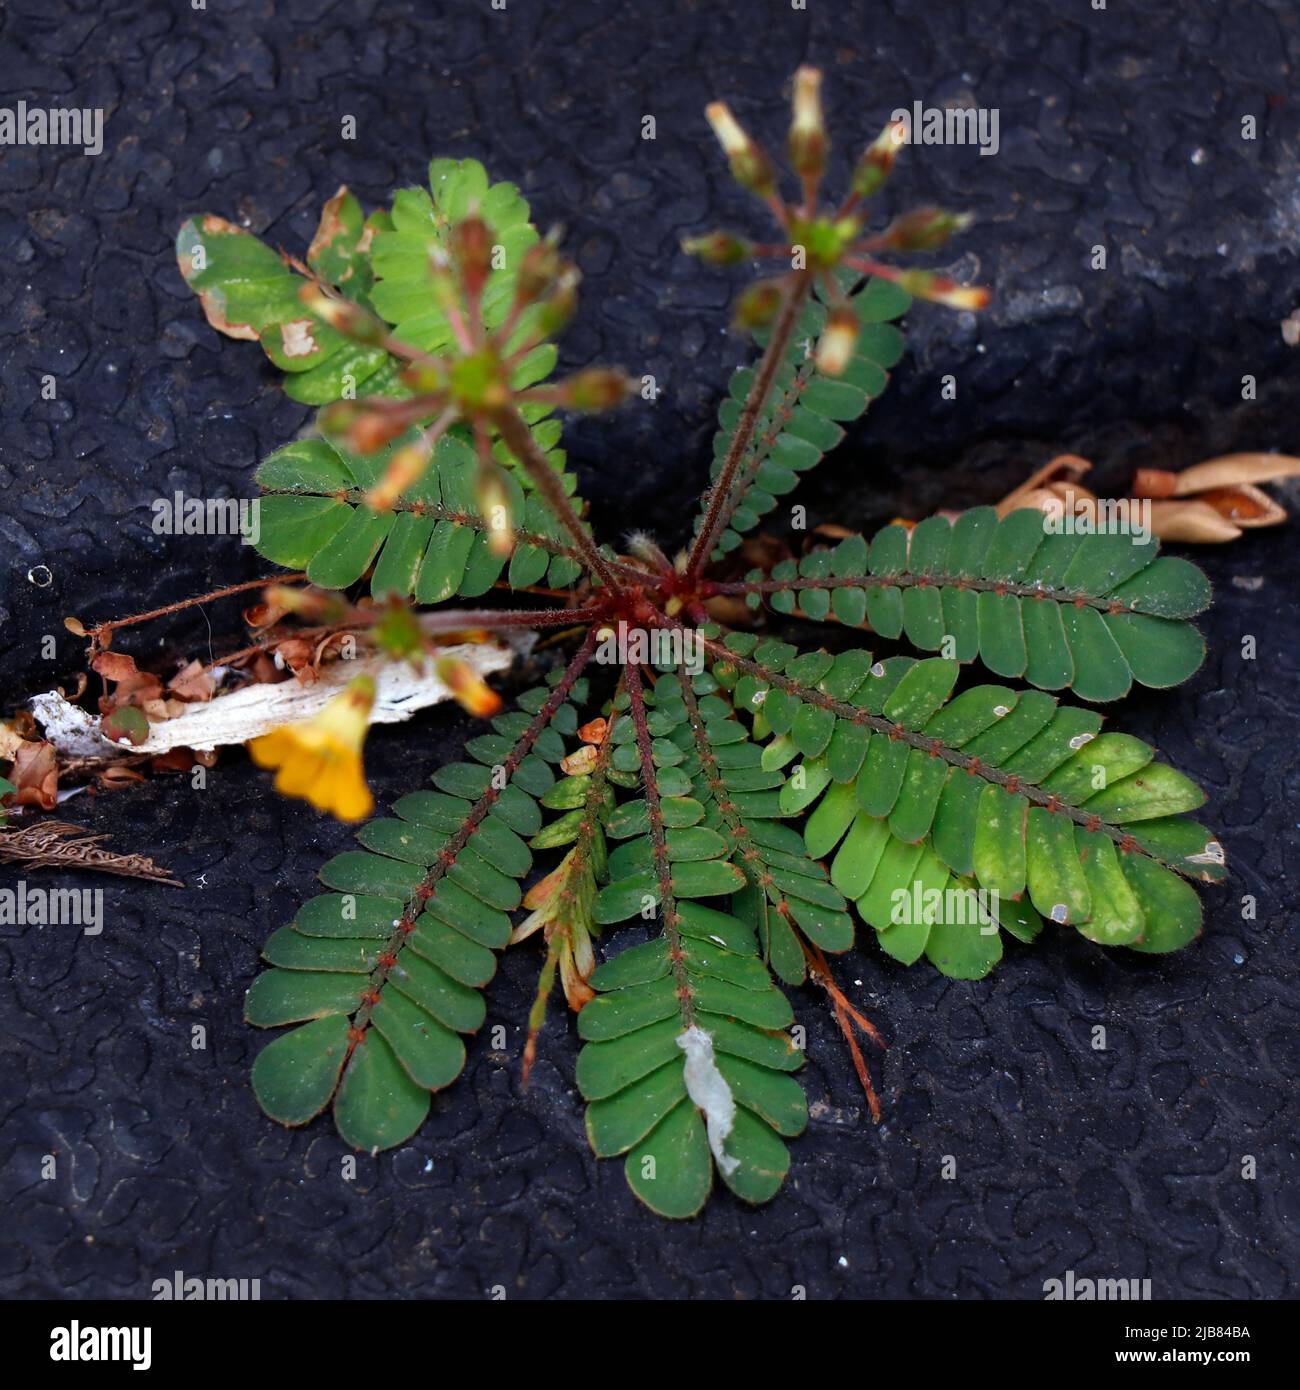 Biophytum sensitivum, also known as little tree plant, or Mukkootti is a species of plant in the genus Biophytum of the family Oxalidaceae, herbal med Stock Photo